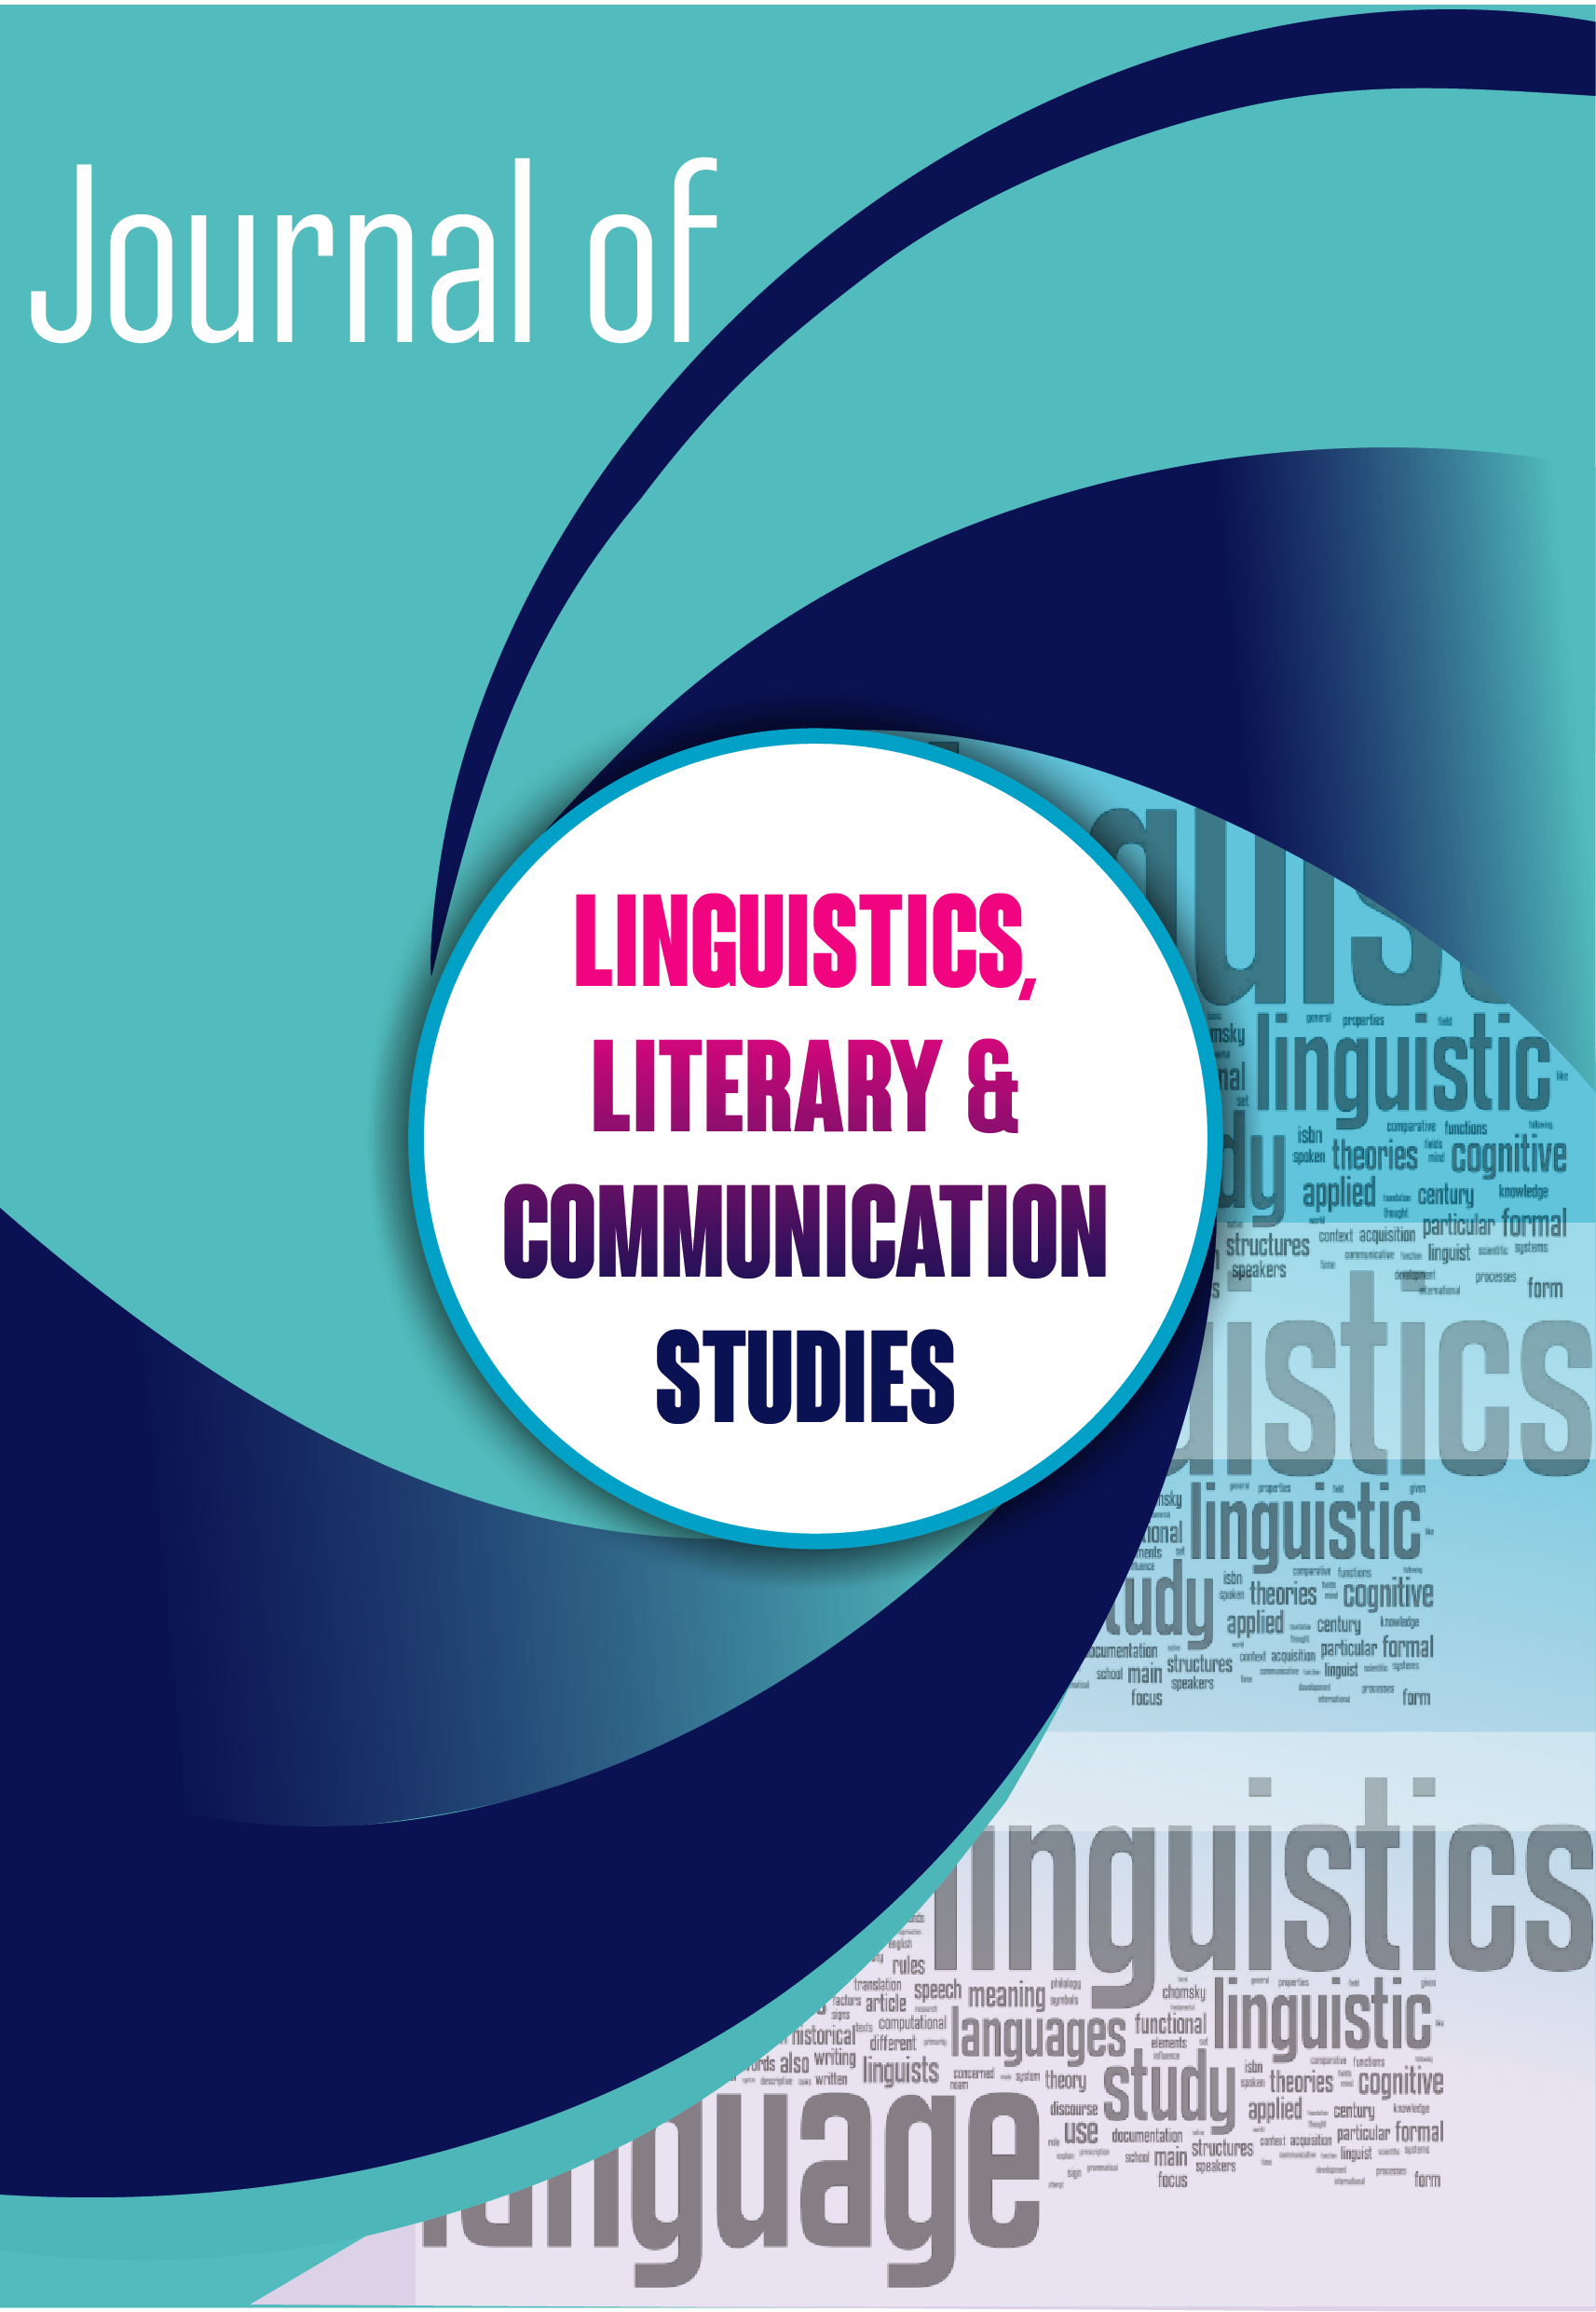 Journal of Linguistics, Literary and Communication Studies